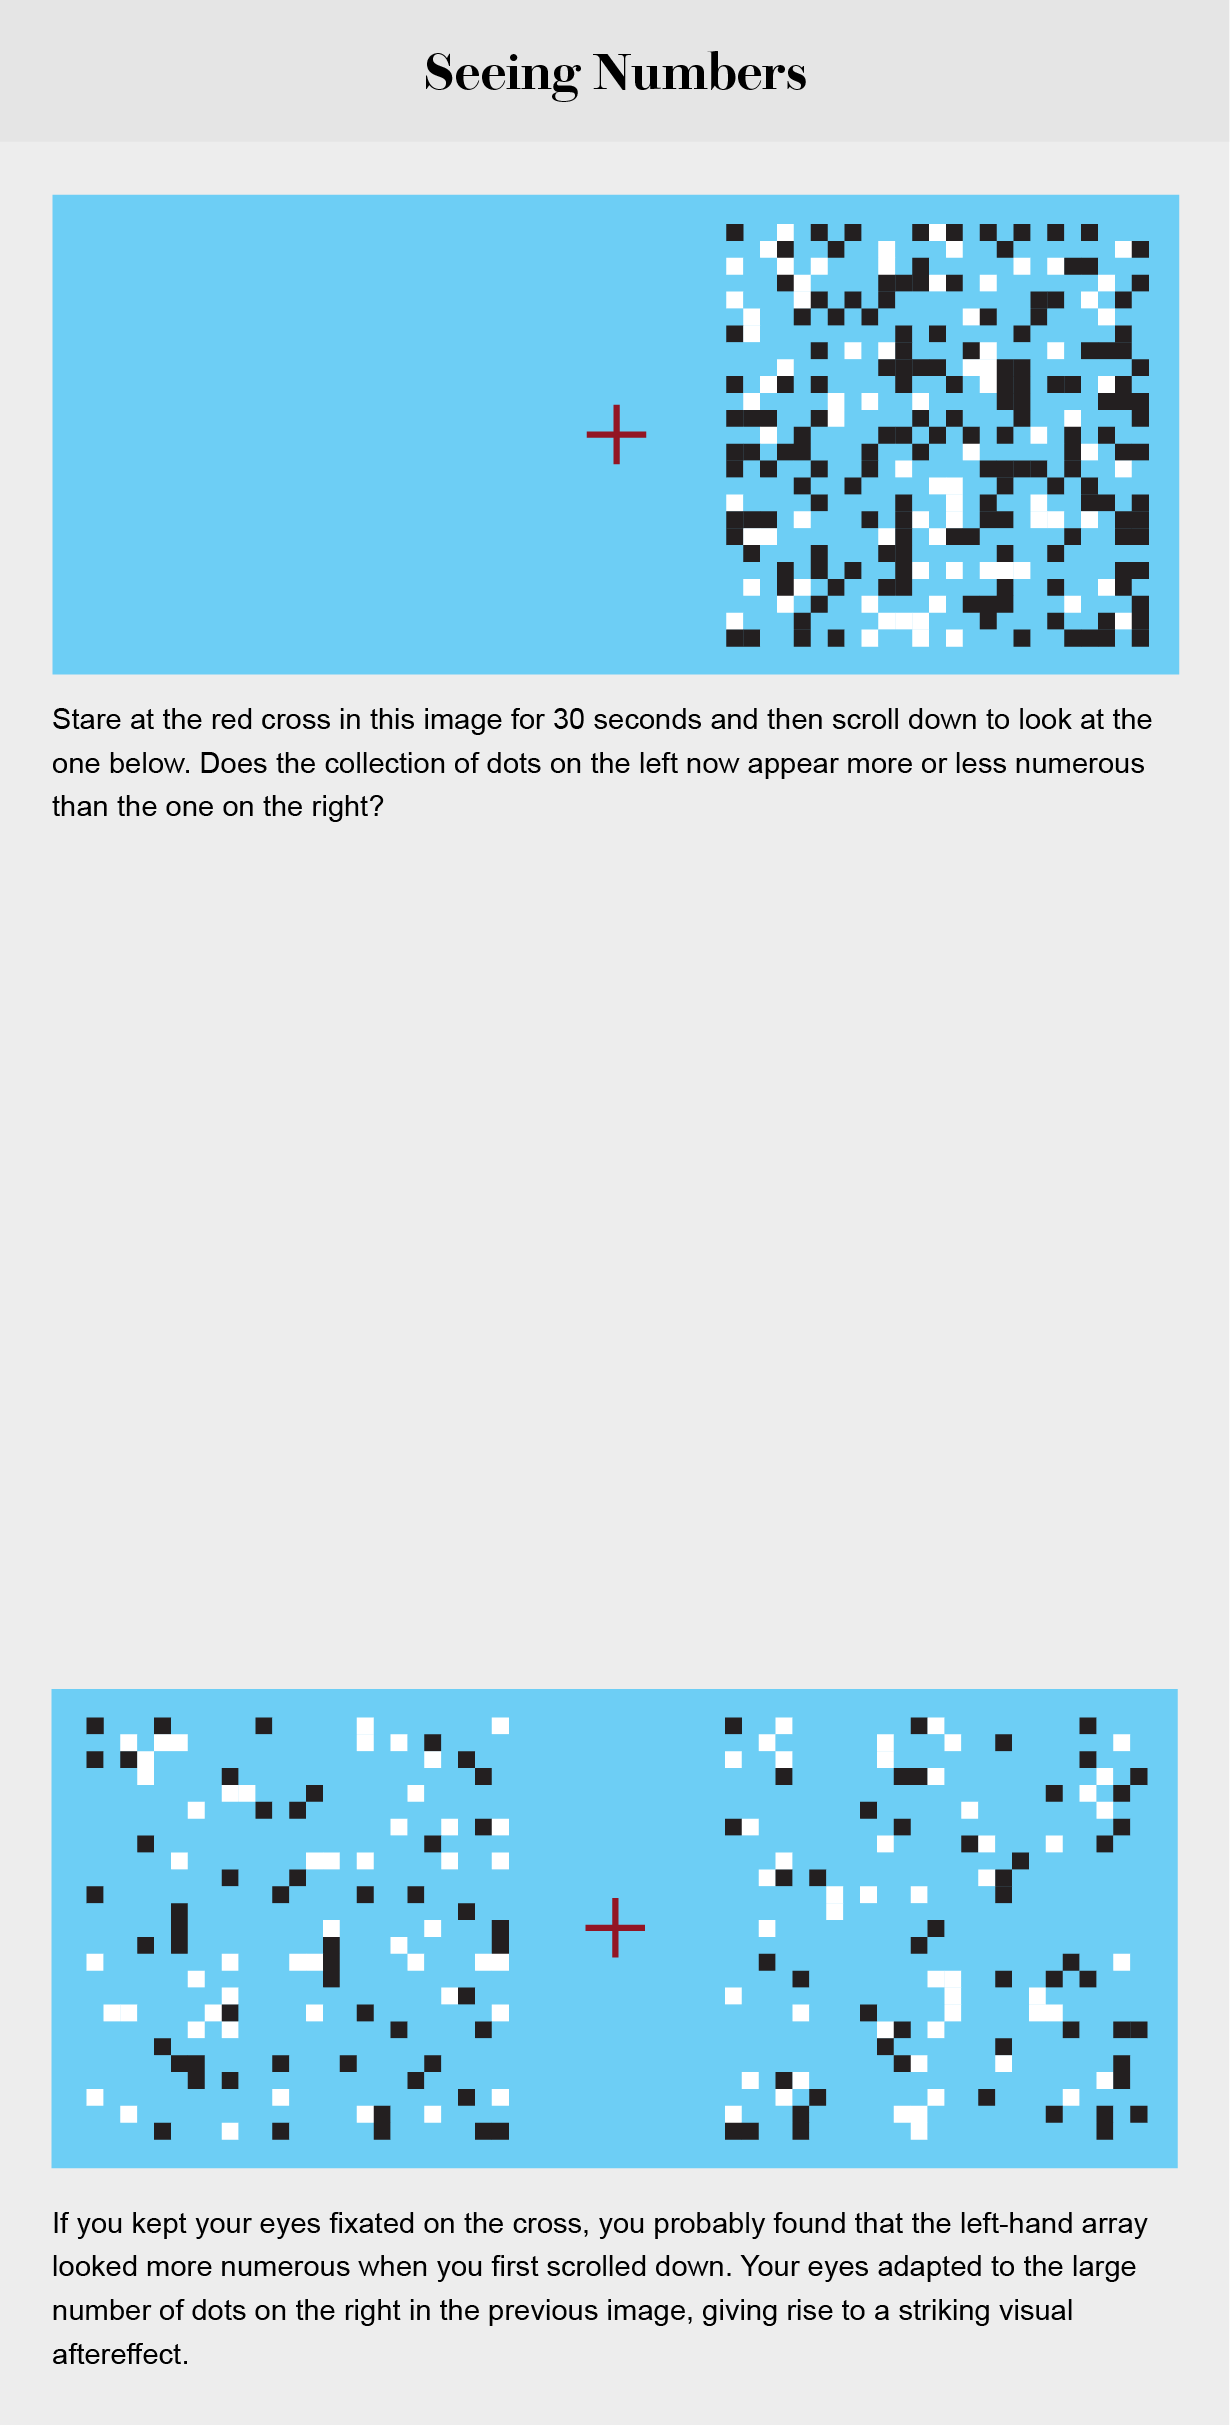 Optical illusion shows how our eyes adapt to a large number of dots in one area, making a subsequent, equally sized field of dots in the same position appear less crowded than it really is.